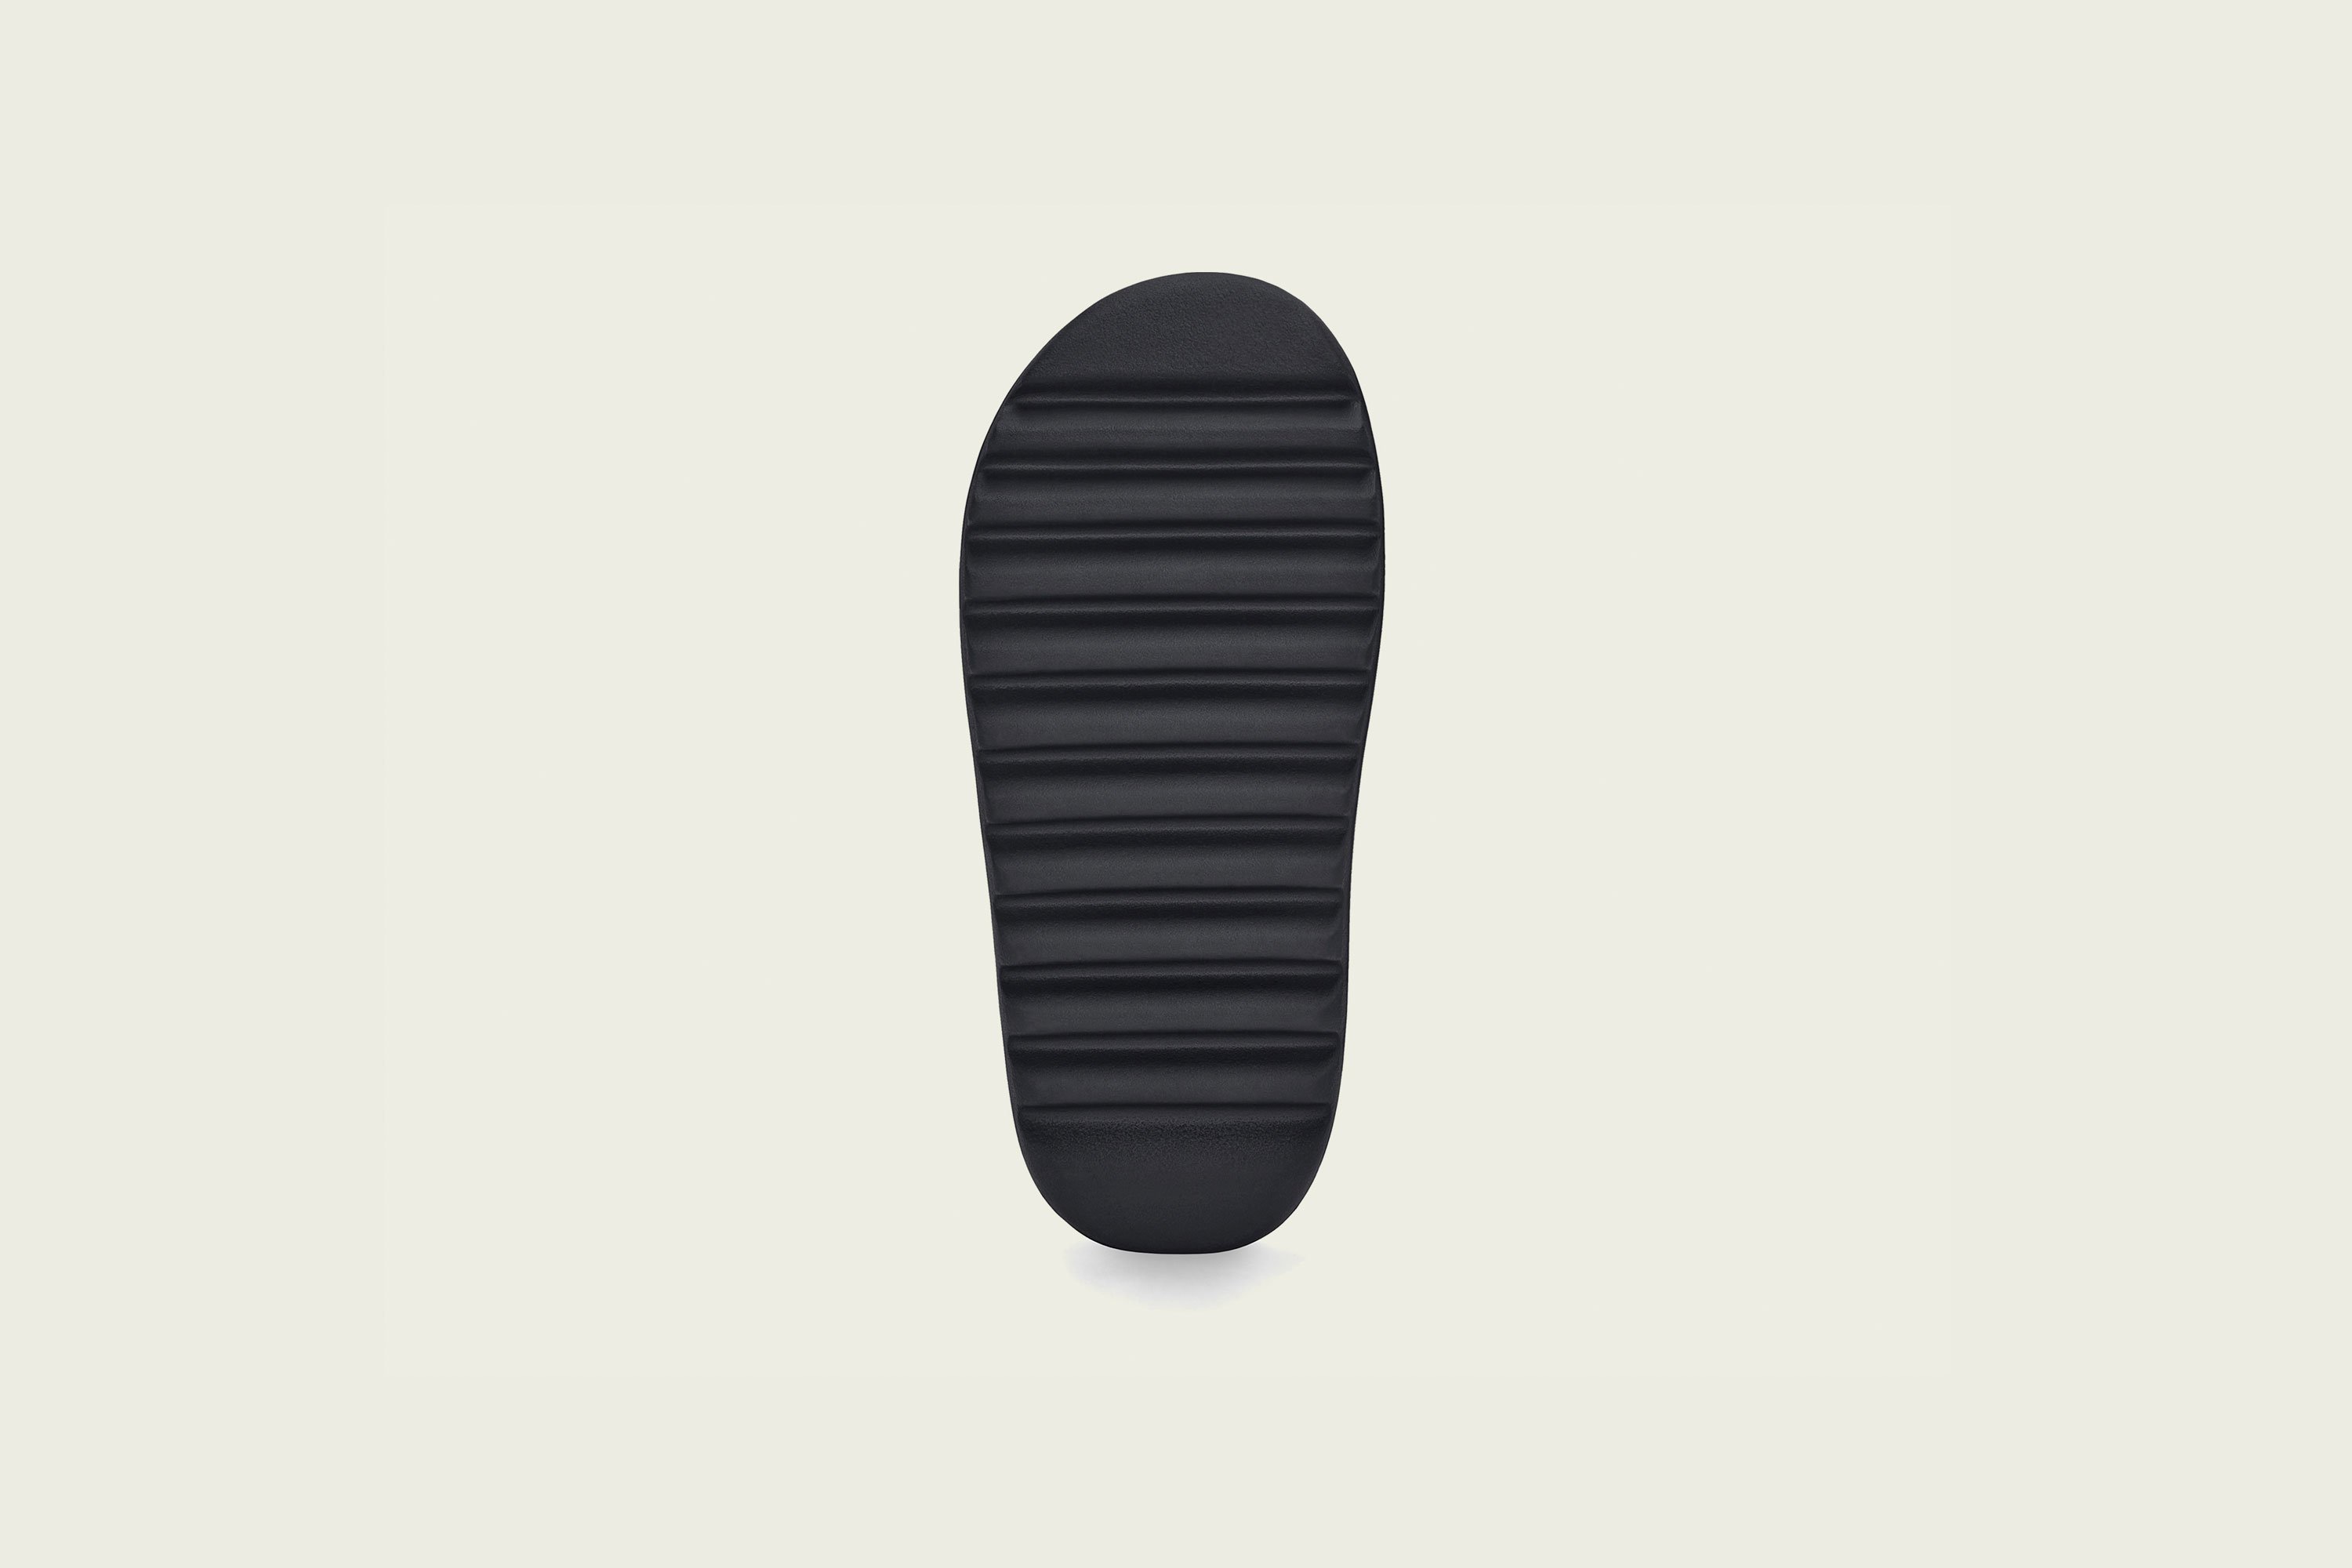 adidas - Yeezy Slide - Onyx - Up There